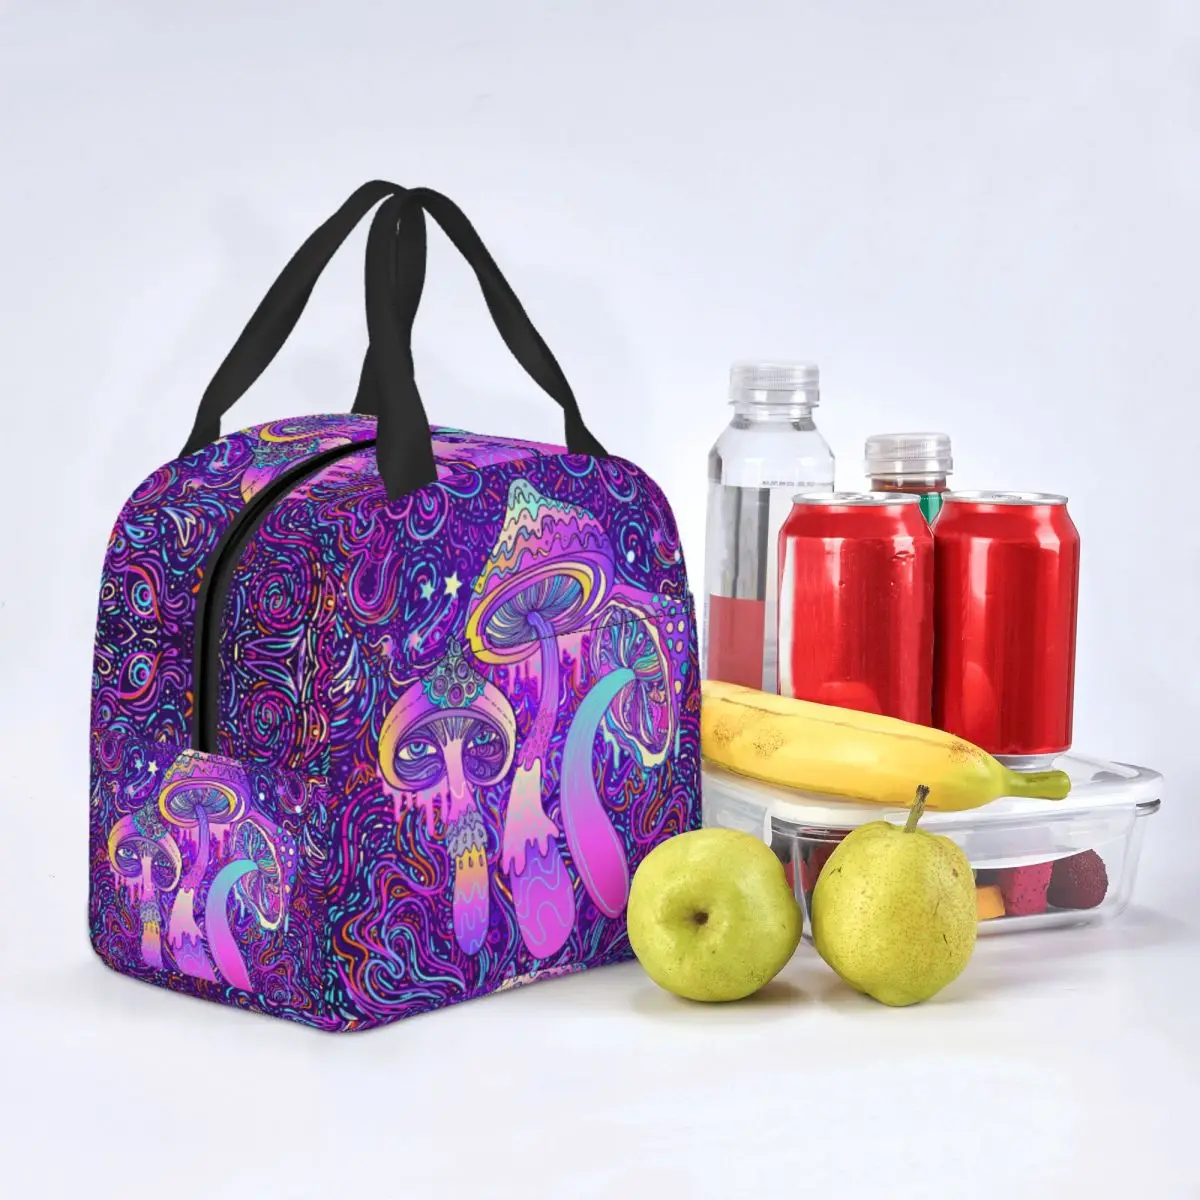 Psychedelic Mushroom Trippy Lunch Bags Waterproof Insulated Cooler Bags Shrooms Thermal Cold Food Picnic Lunch Box for Women